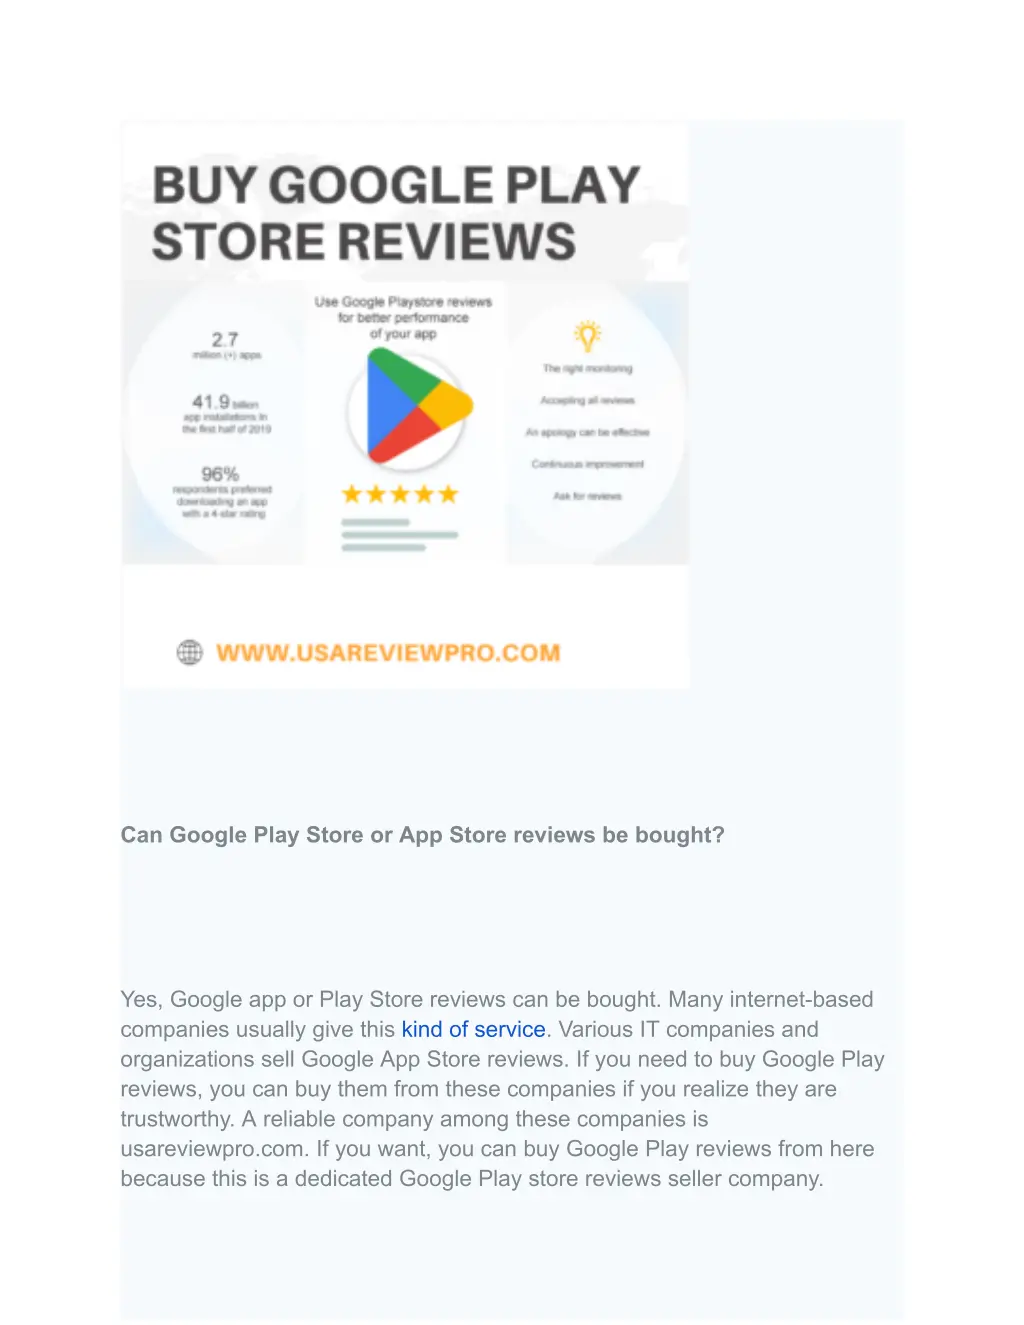 can google play store or app store reviews